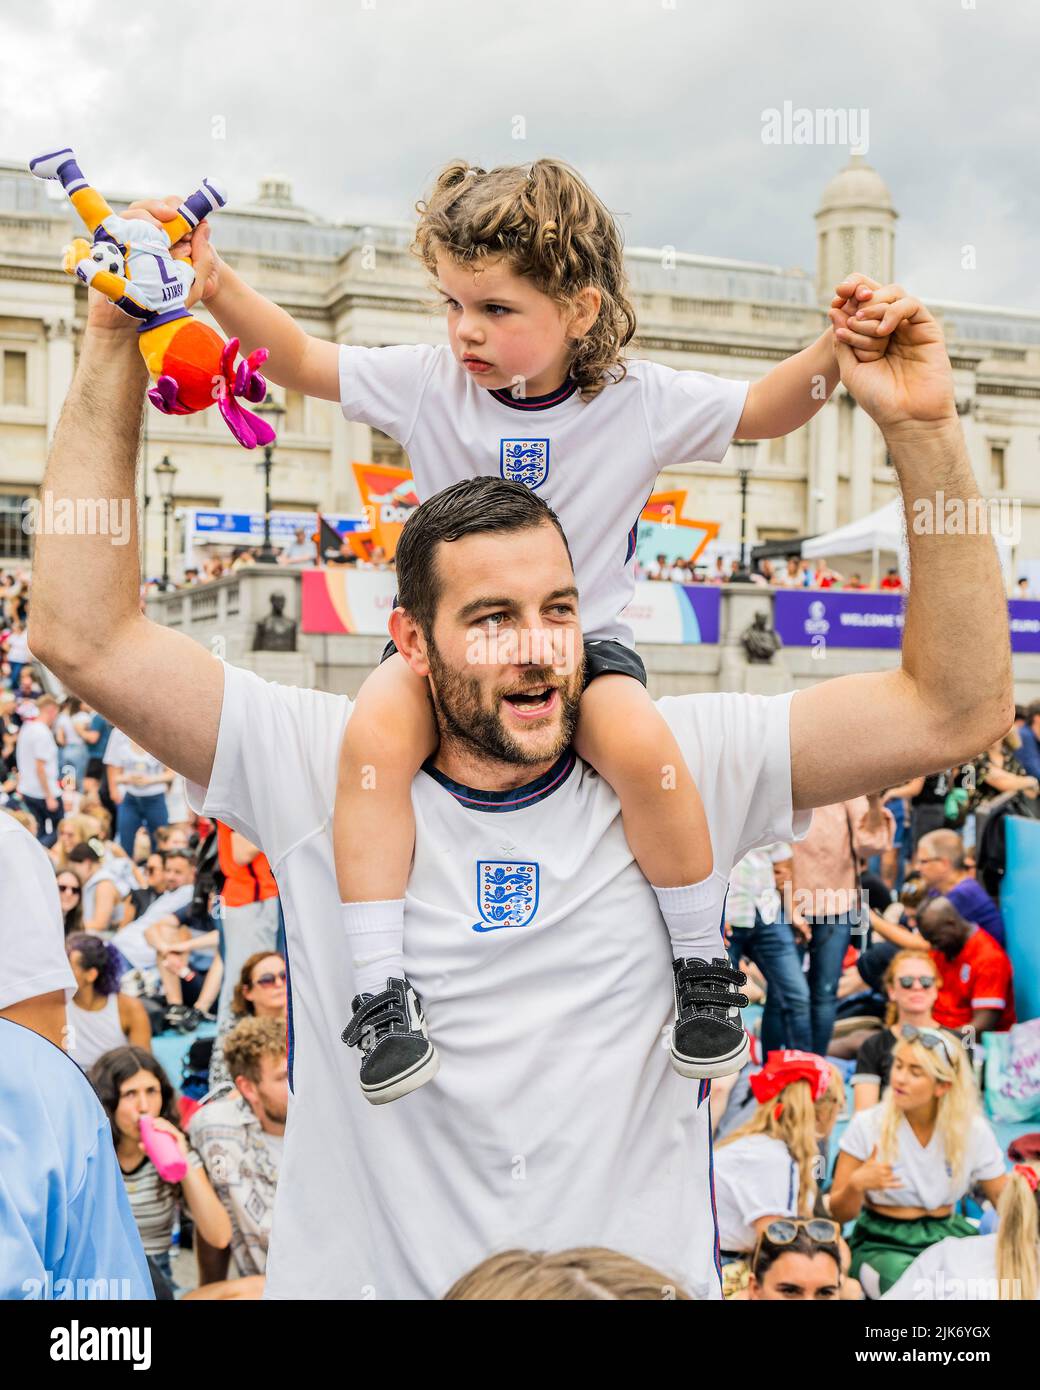 London, UK. 31st July, 2022. England fans - England v Germany UEFA Women's EURO 2022 final match fanzone in Trafalgar Square. Organised by the Mayor of London Sadiq Khan, and tournament organisers. It offered free access for up to 7,000 supporters. Credit: Guy Bell/Alamy Live News Stock Photo